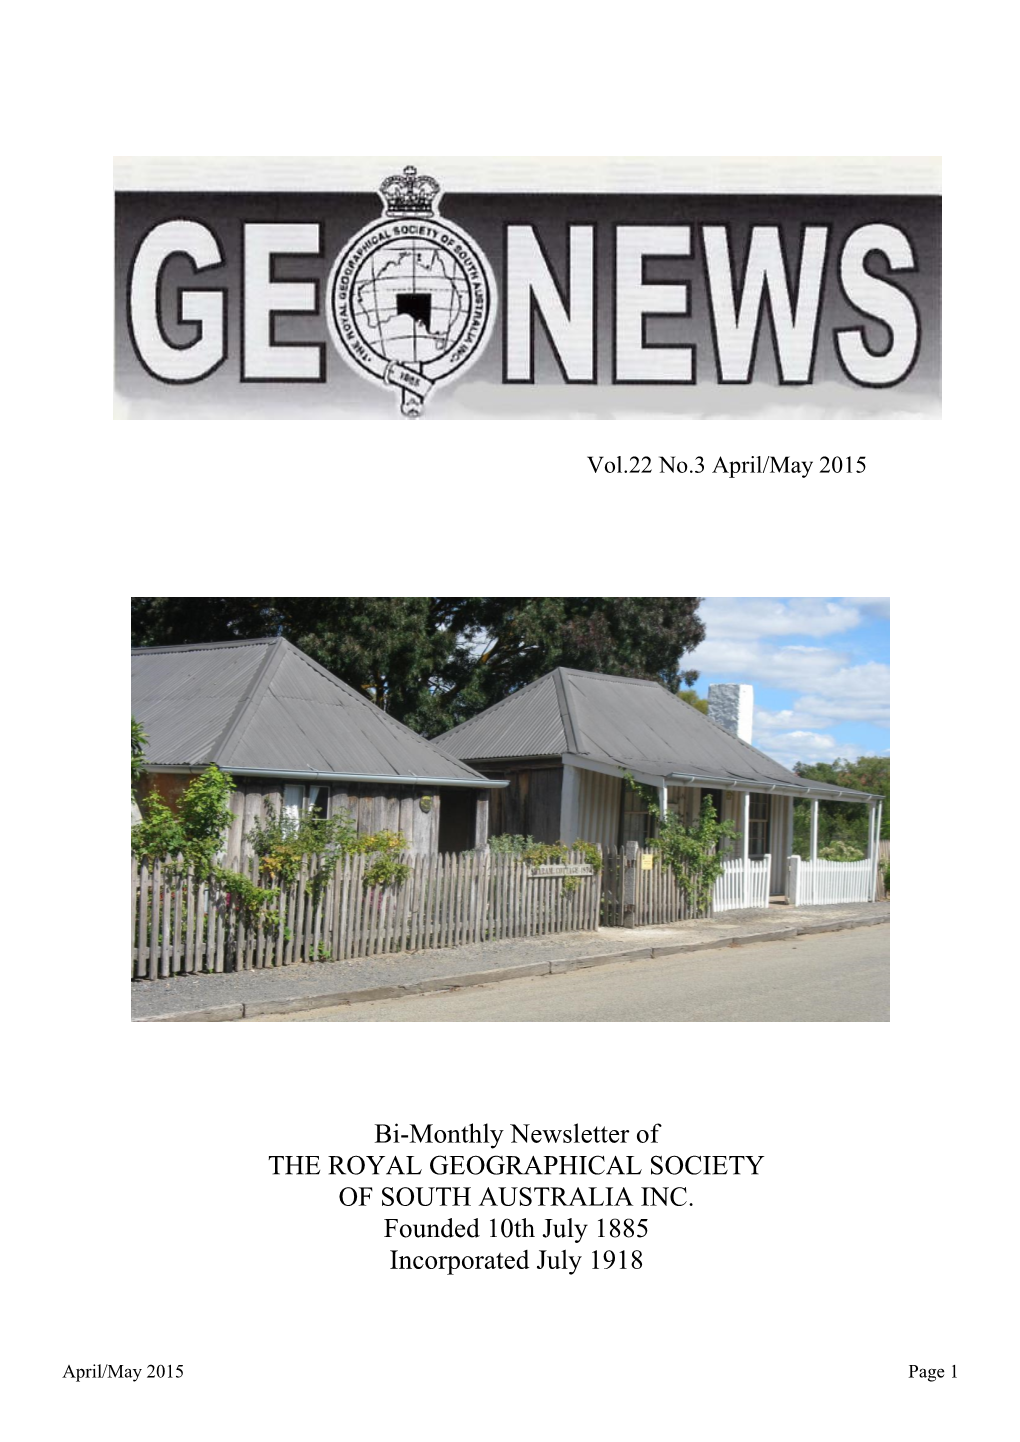 Bi-Monthly Newsletter of the ROYAL GEOGRAPHICAL SOCIETY of SOUTH AUSTRALIA INC